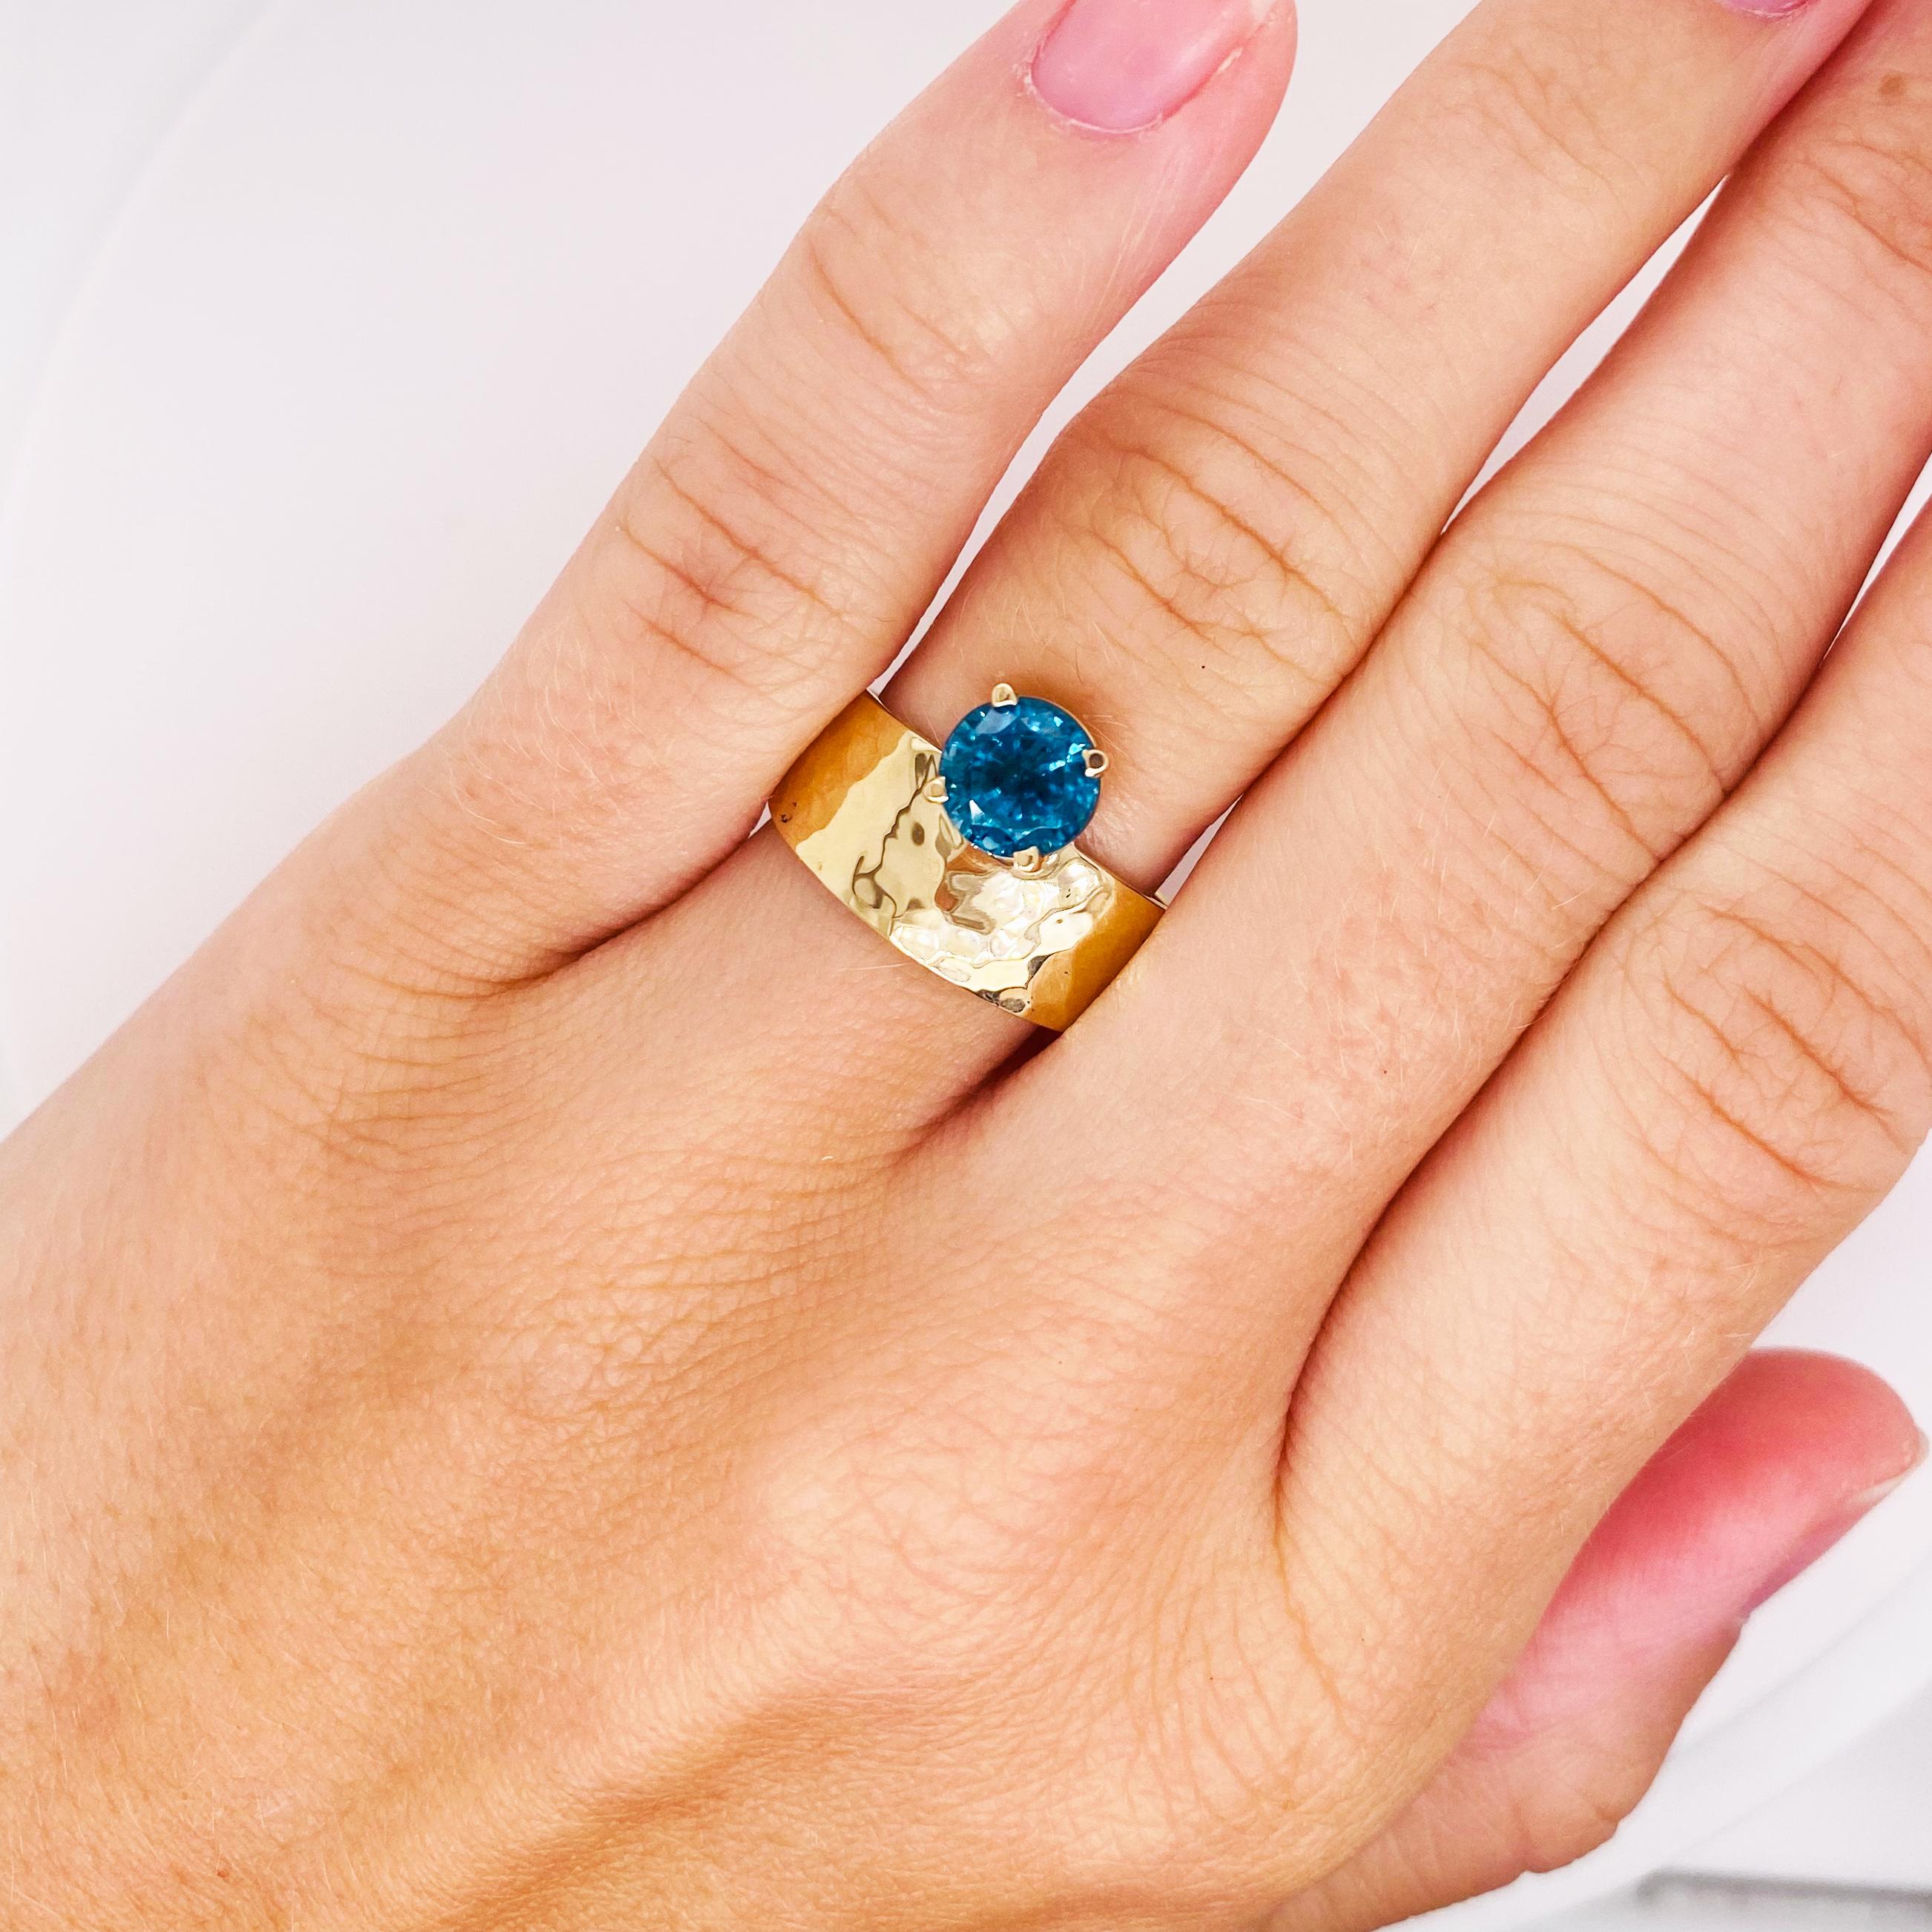 This bright ocean blue zircon has better brilliance than a diamond. This means that it has incredible sparkle and reflection of light-better than a blue topaz or blue tourmaline. Some of the Queen of England’s jewels are genuine zircons like these.